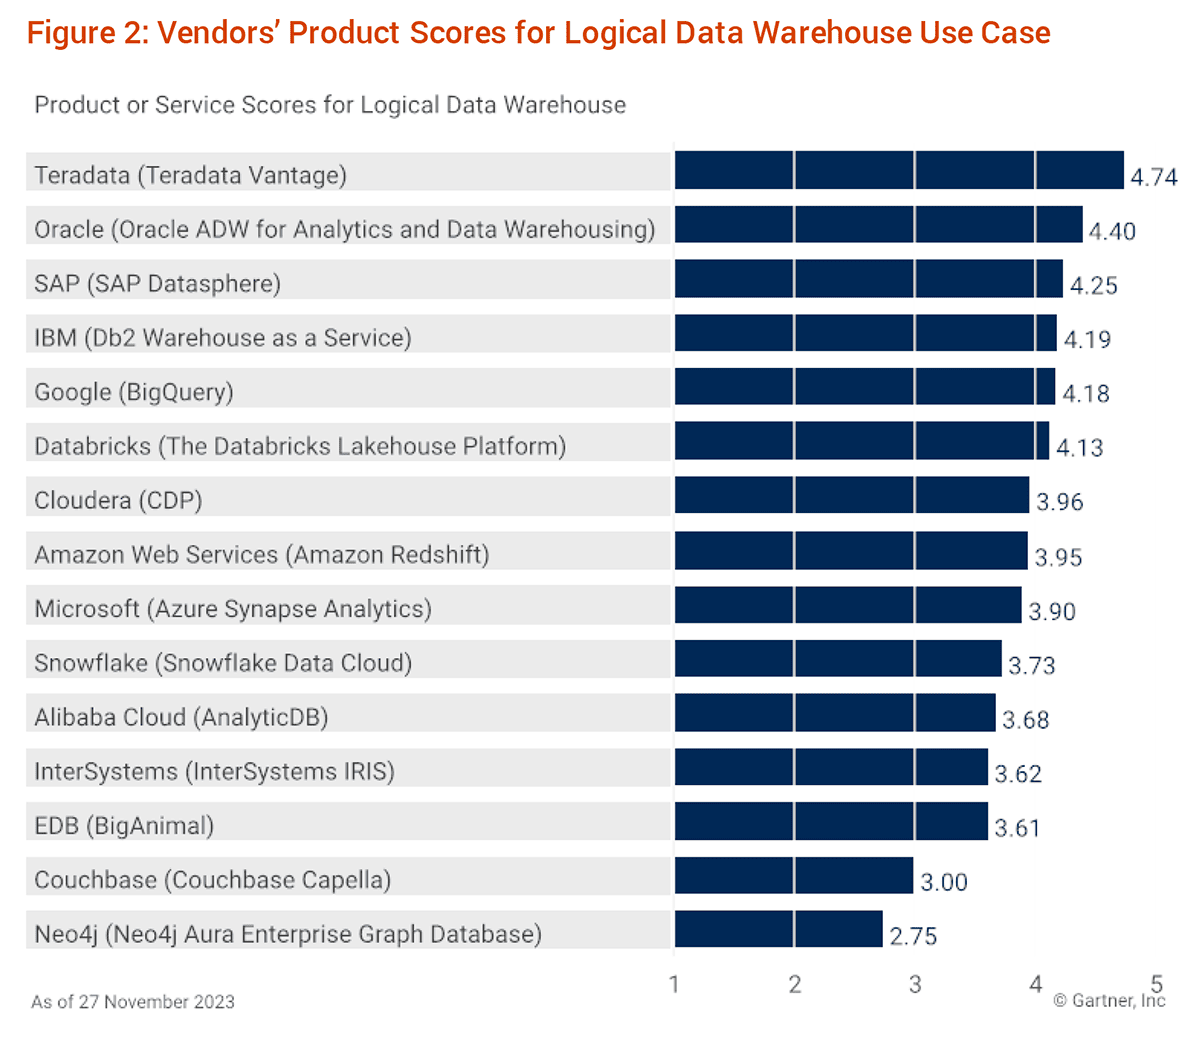 Vendors' Product Scores for Logical Data Warehouse Use Case